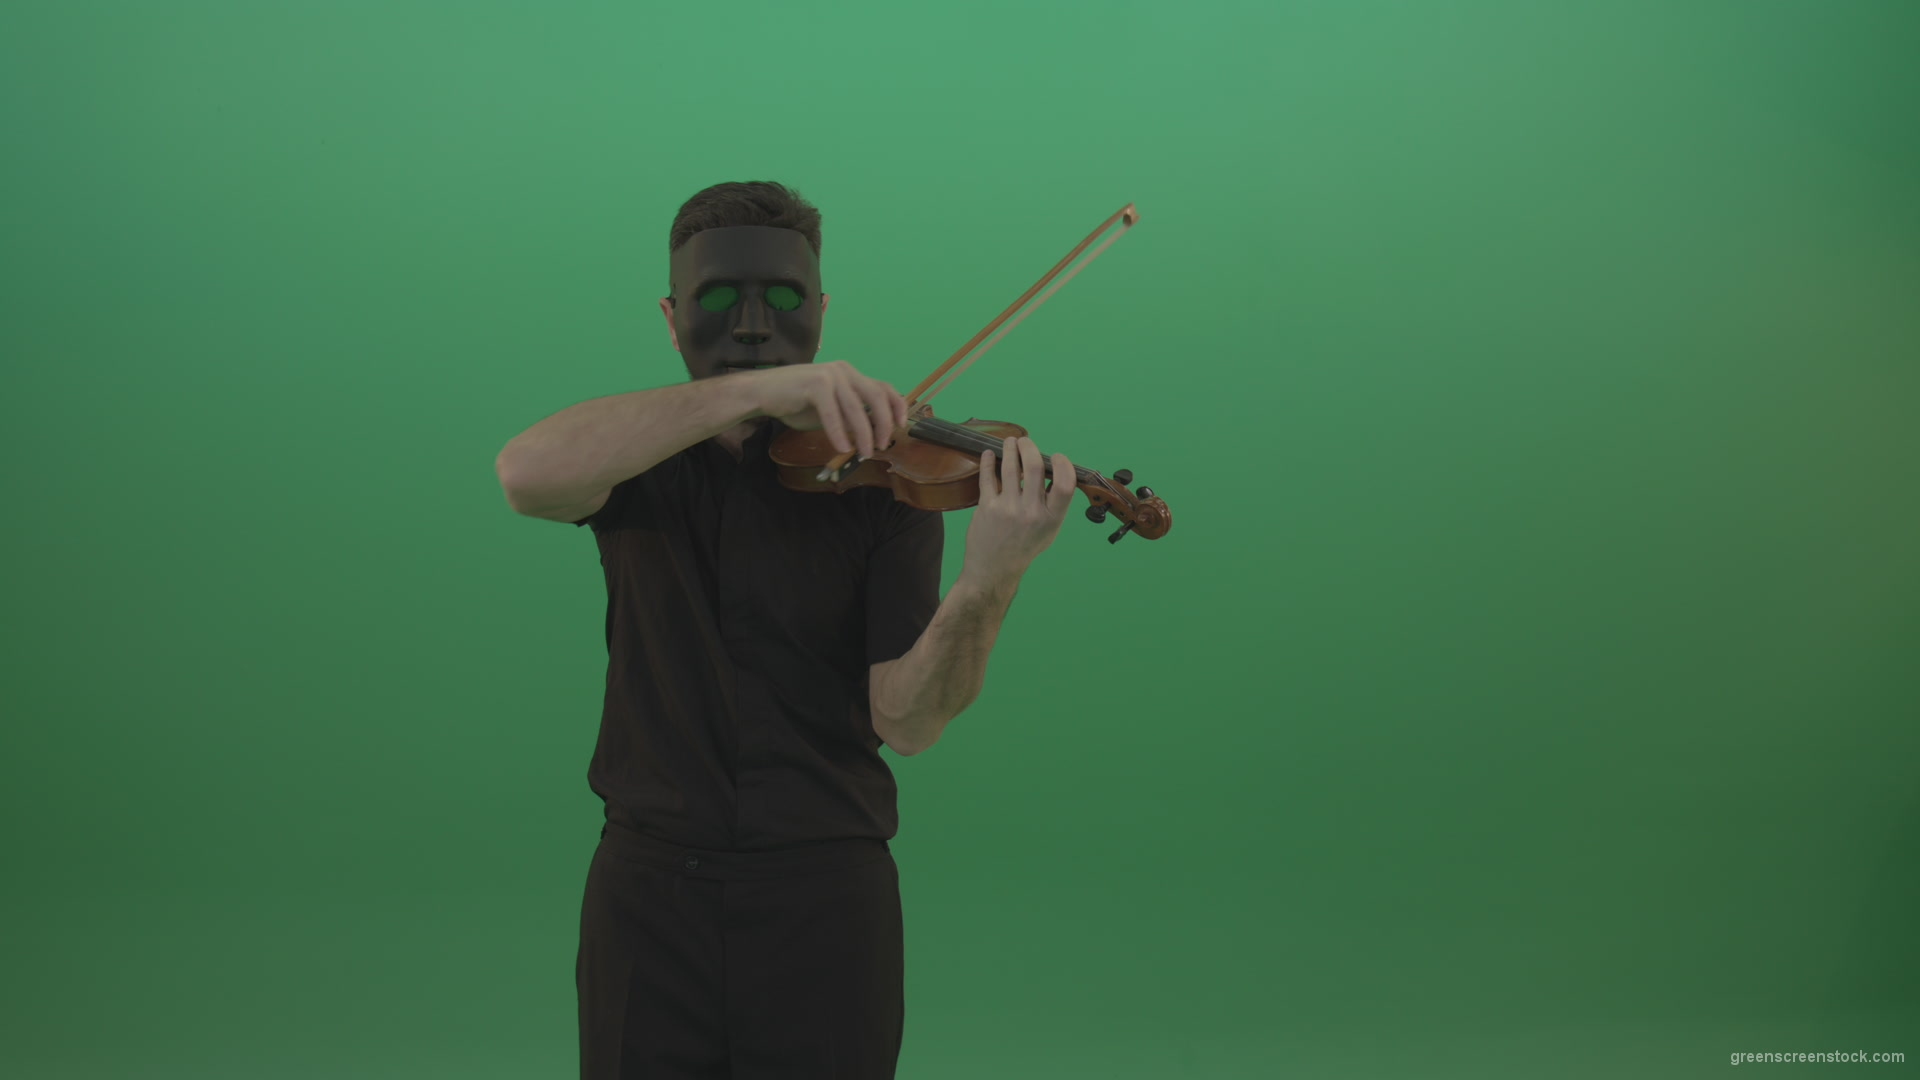 Man-in-black-shirt-and-mask-fast-play-violin-fiddle-strings-gothic-music-isolated-on-green-screen_002 Green Screen Stock